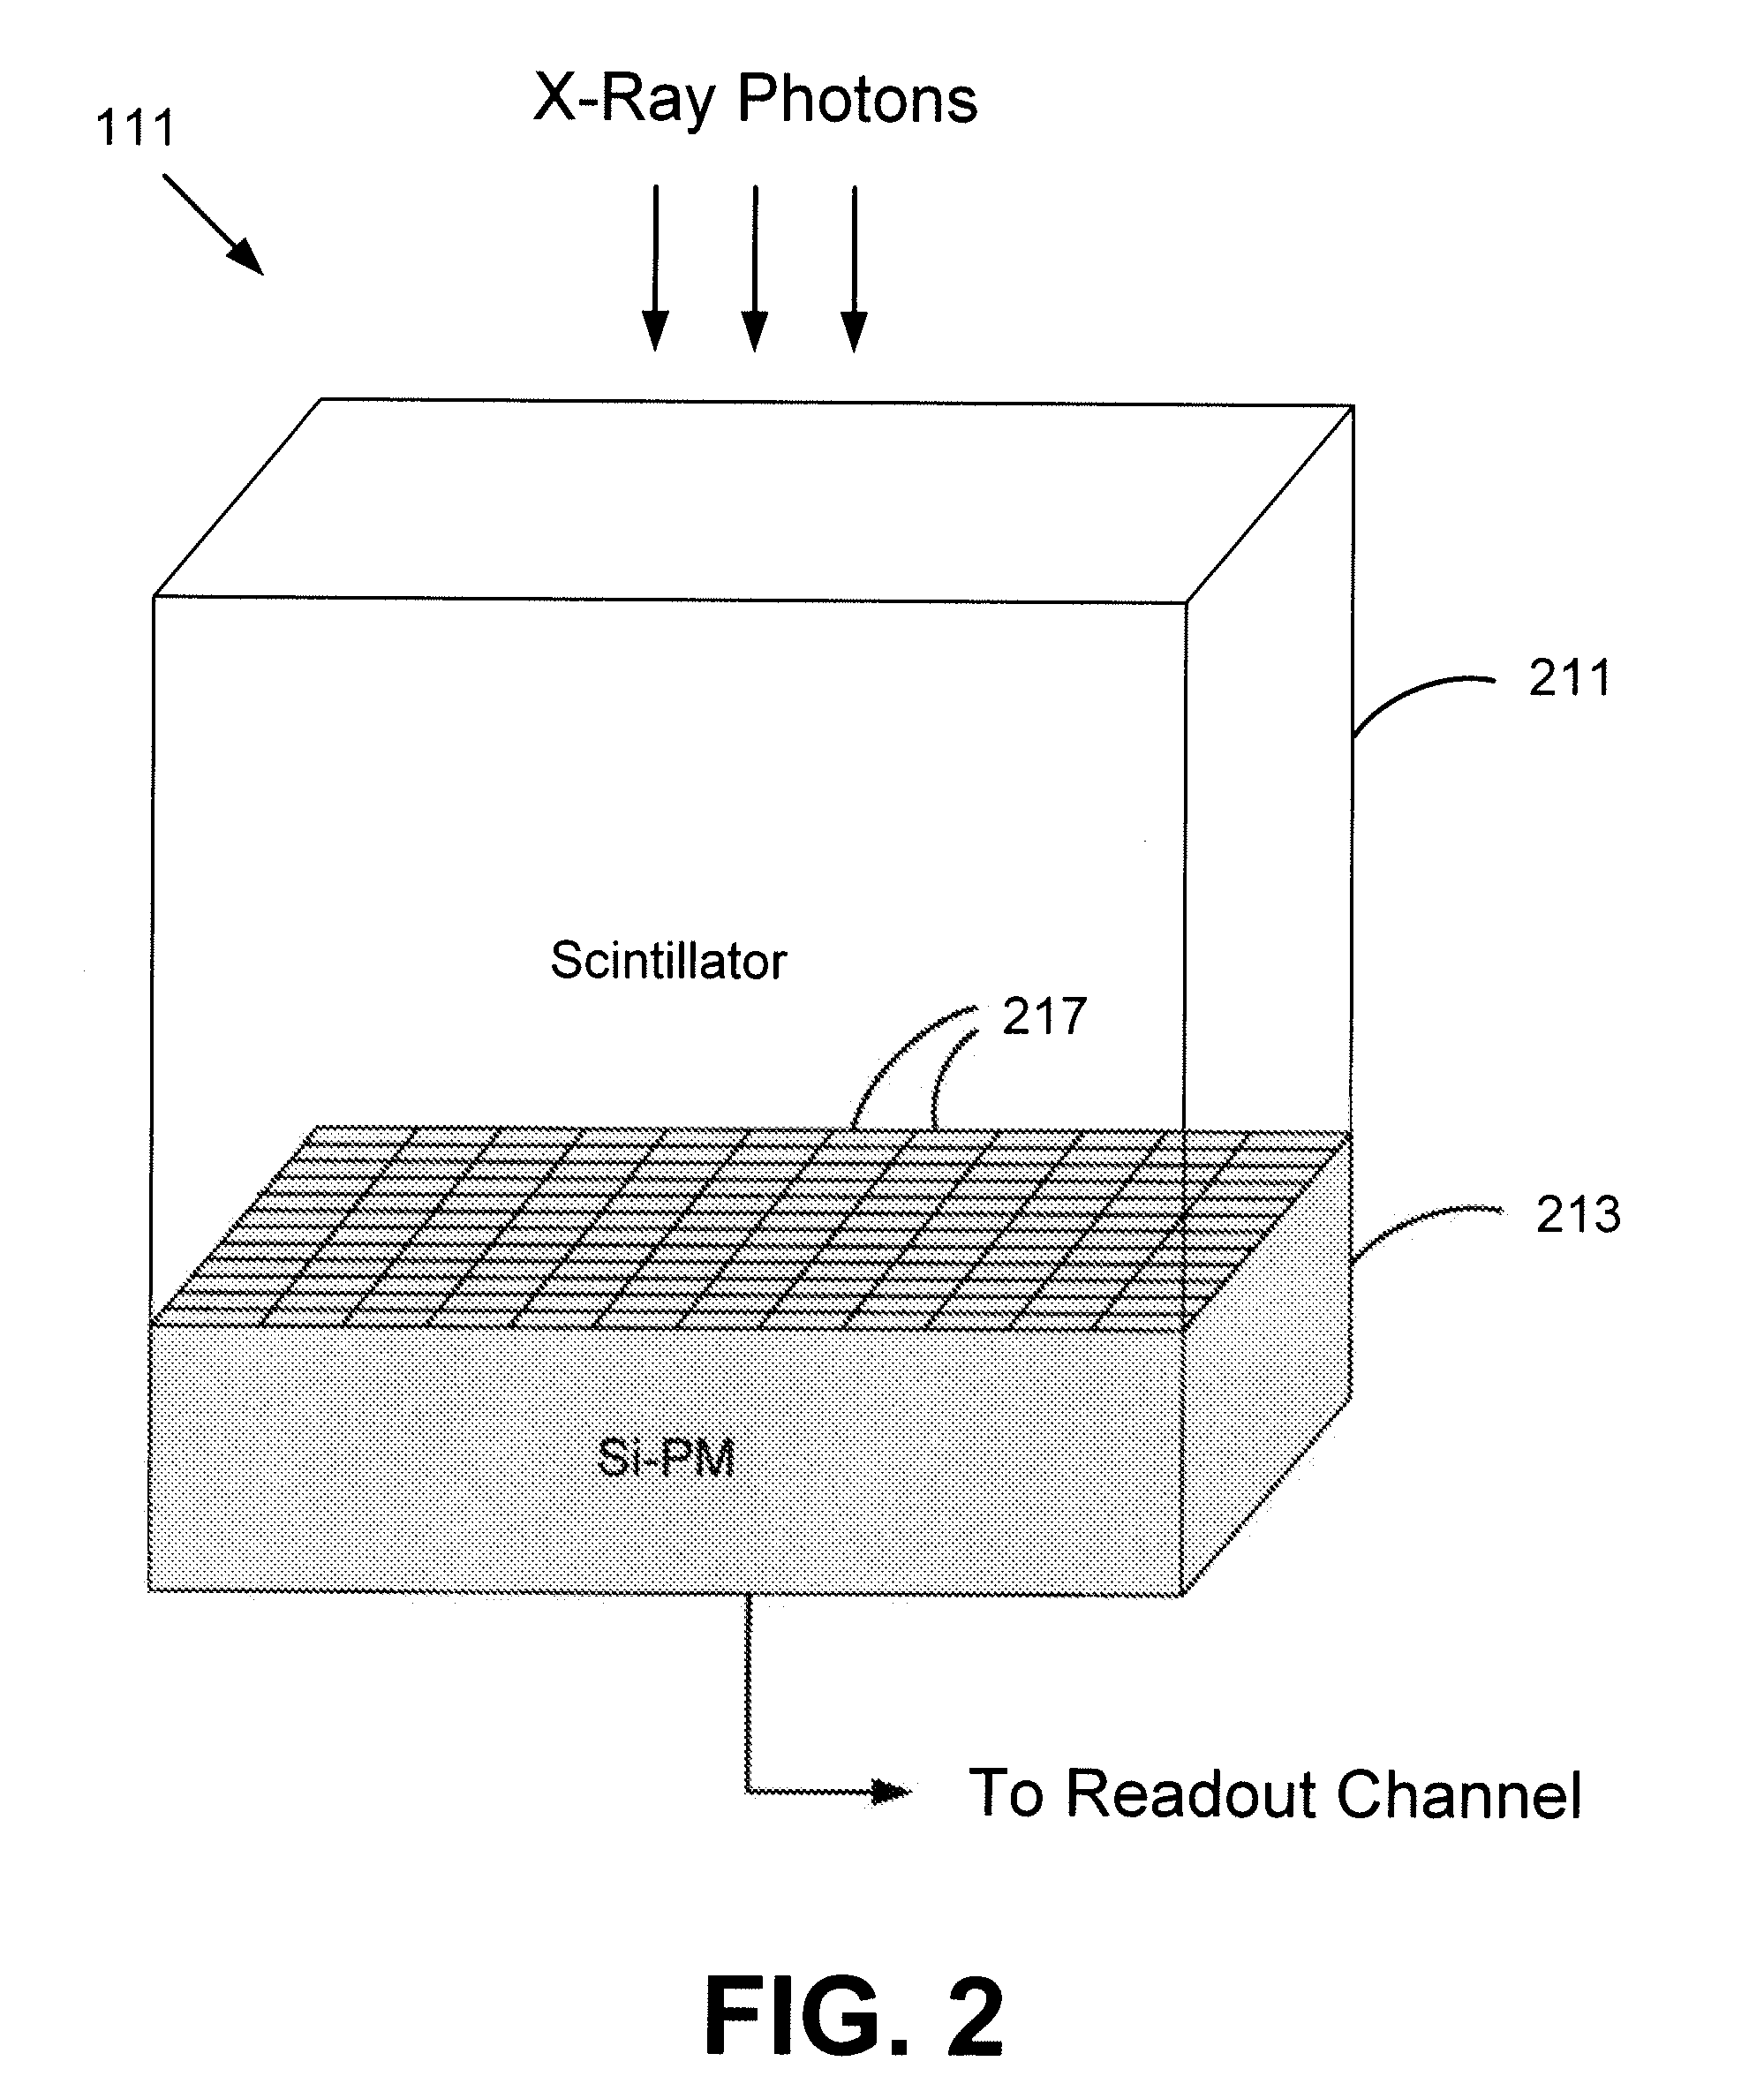 Silicon photomultiplier detector for computed tomography